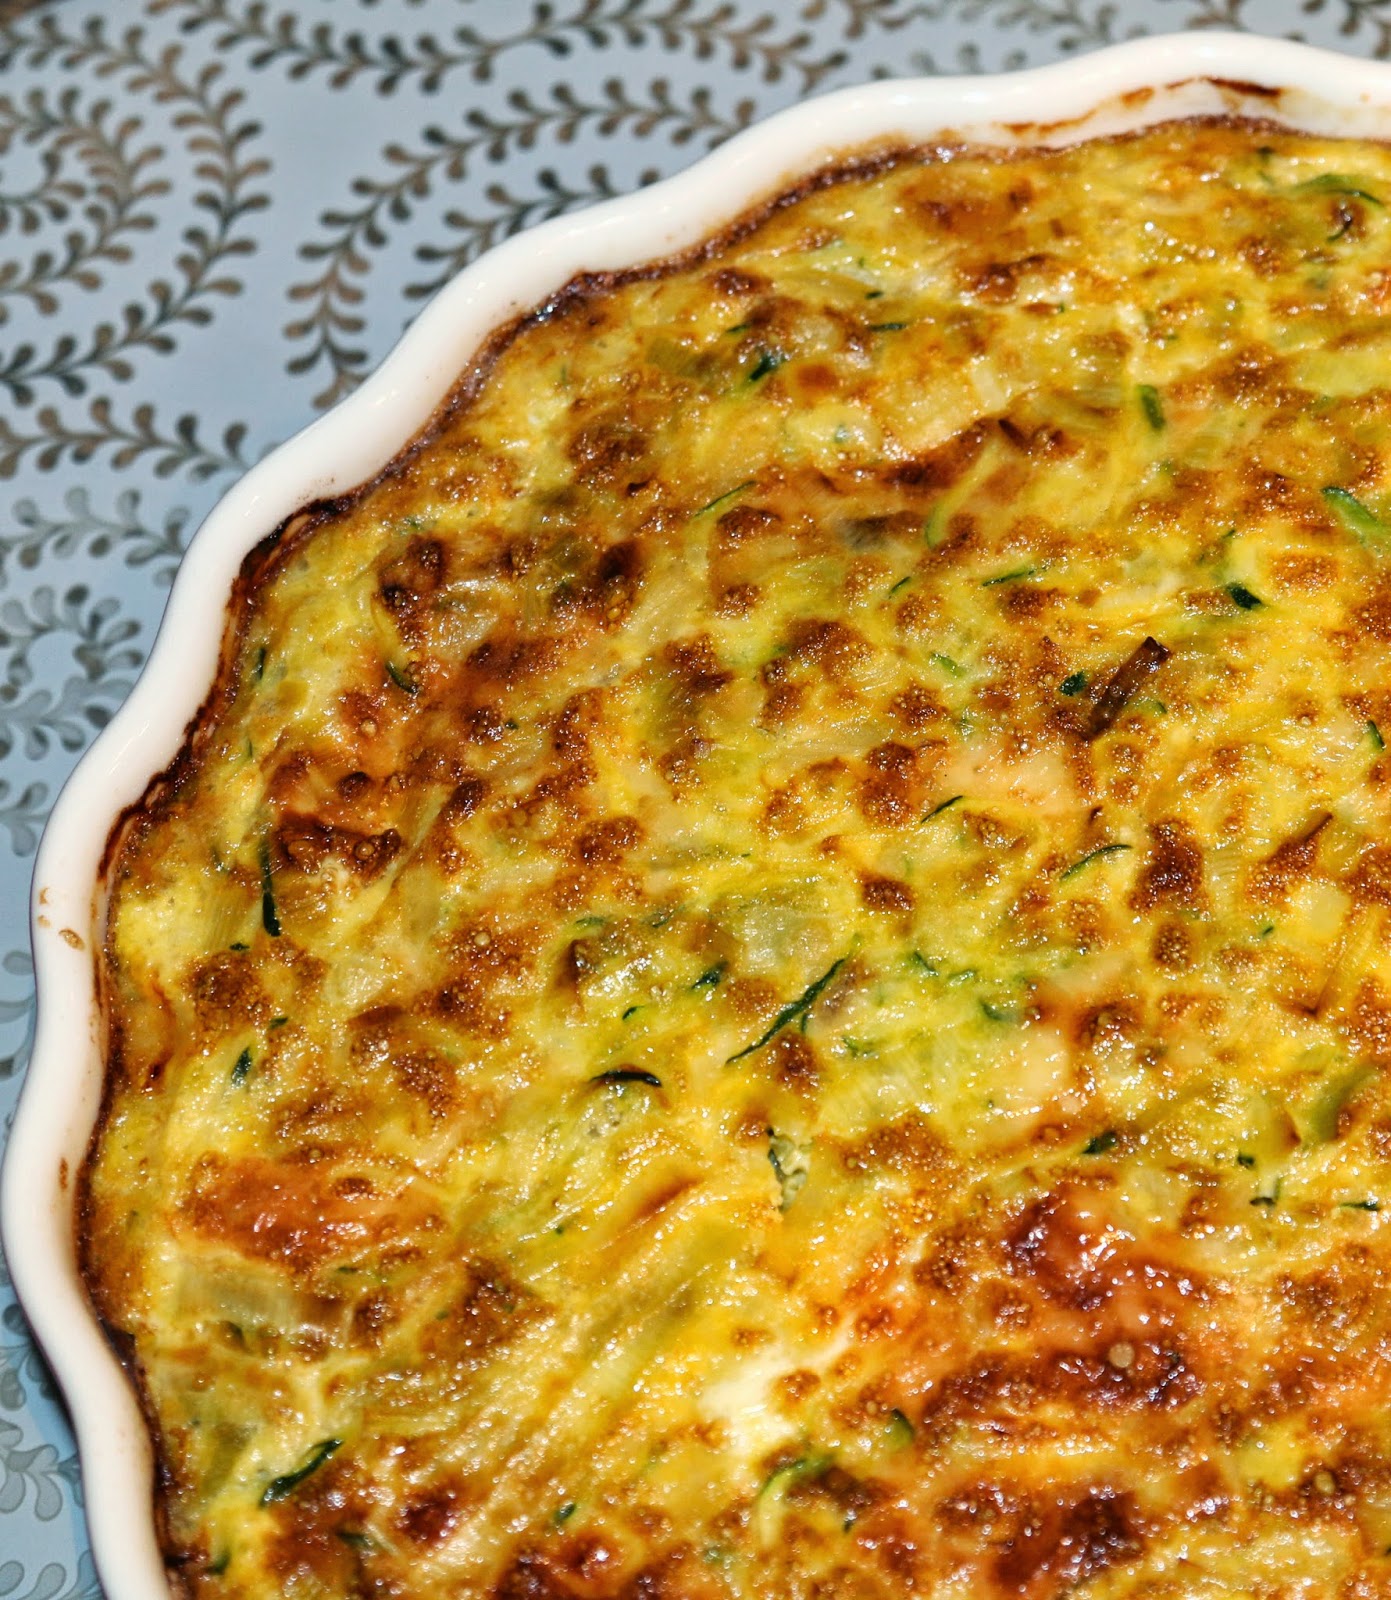 A Touch of the Unexpected: Crustless Zucchini Quiche